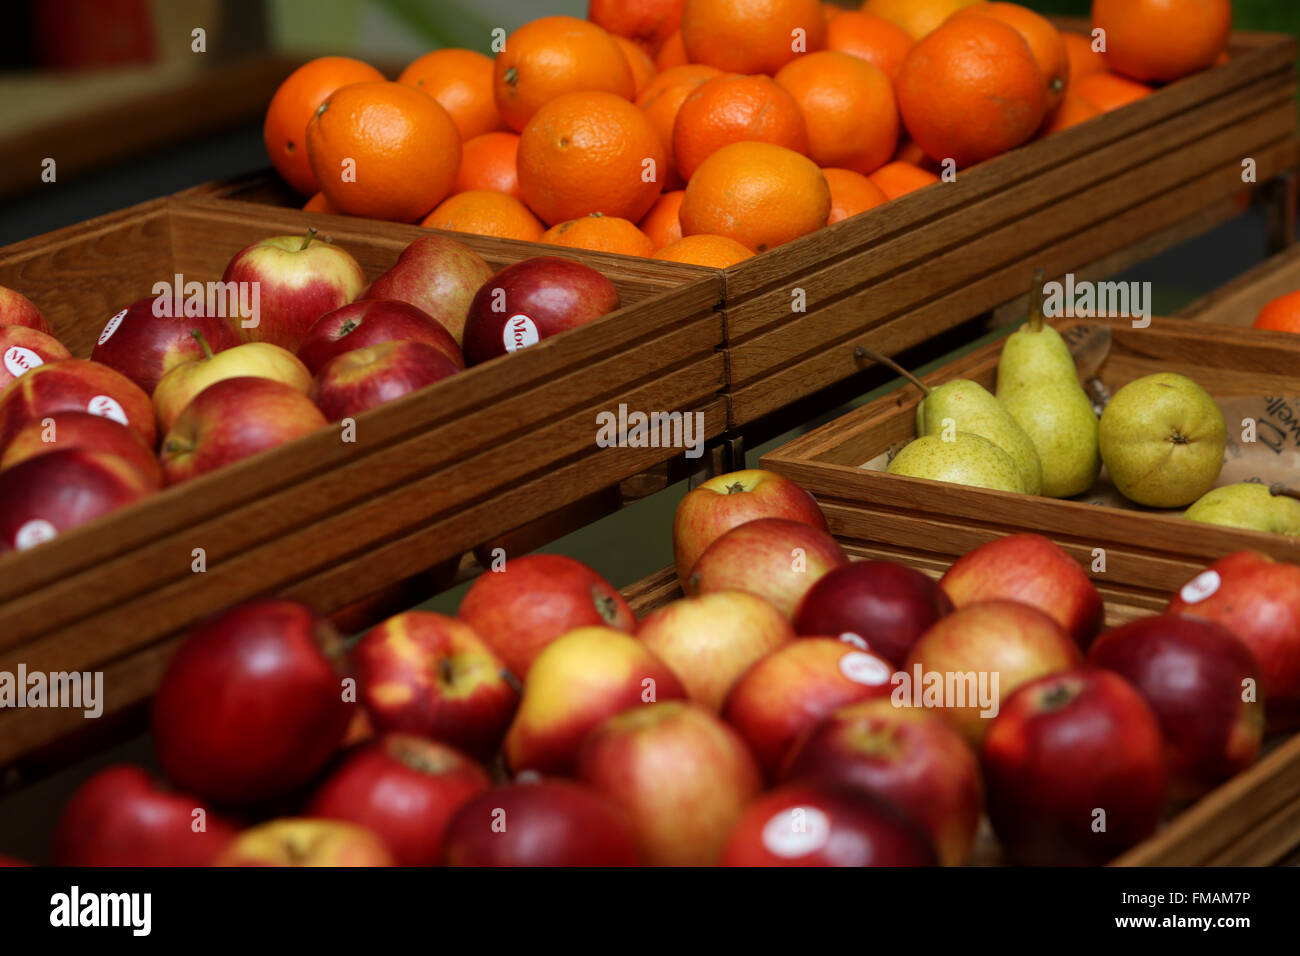 Oranges, apples and pears on display in a school café in Brighton, East Sussex, UK. Stock Photo